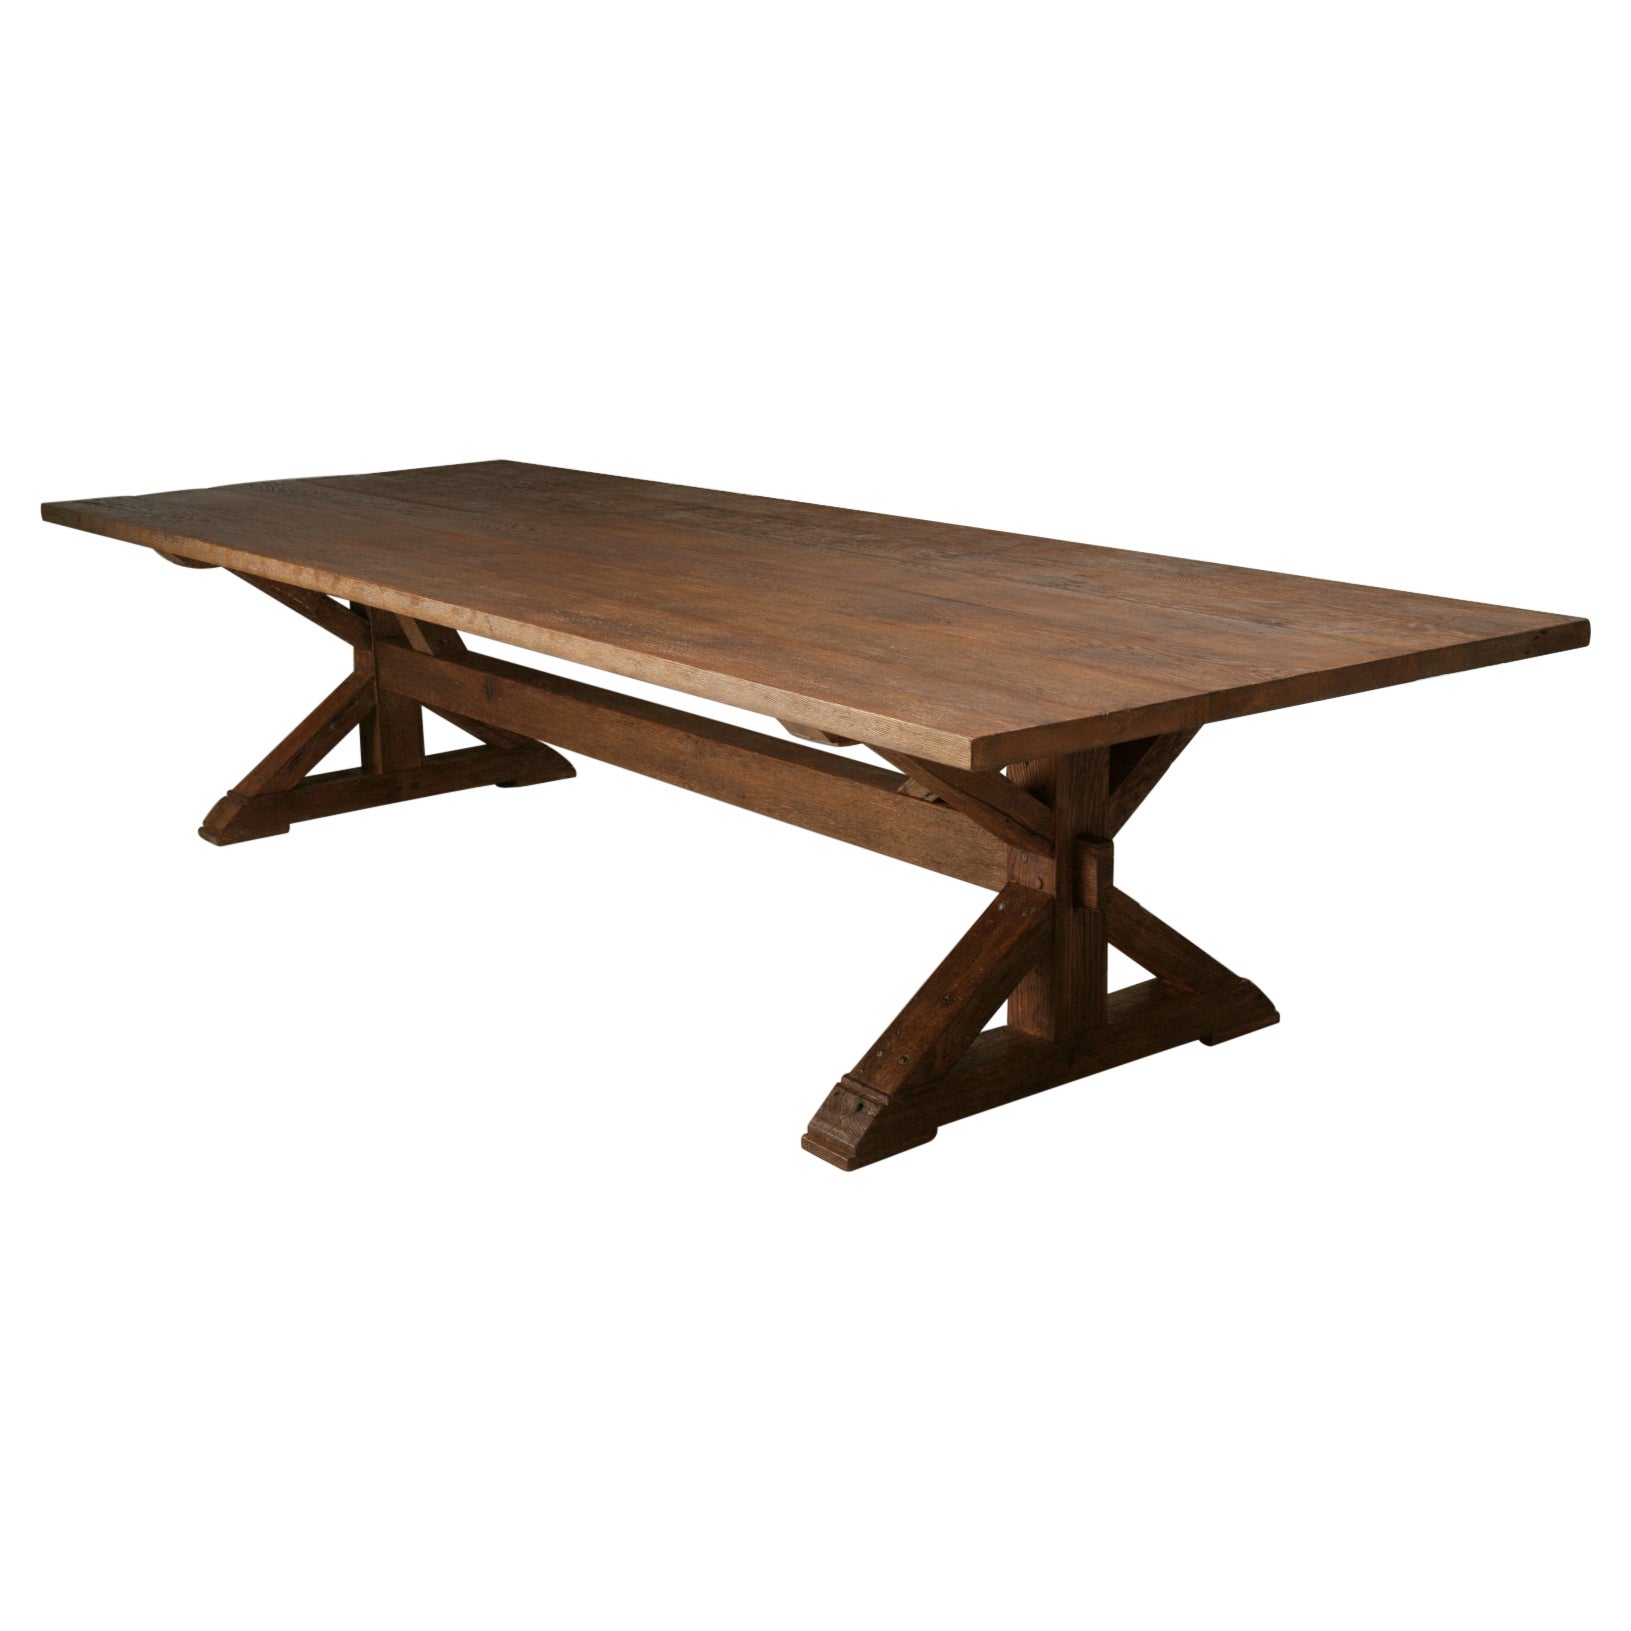 French Inspired Dining or Farm Table Reclaimed Oak Made to Order Any Size, Color